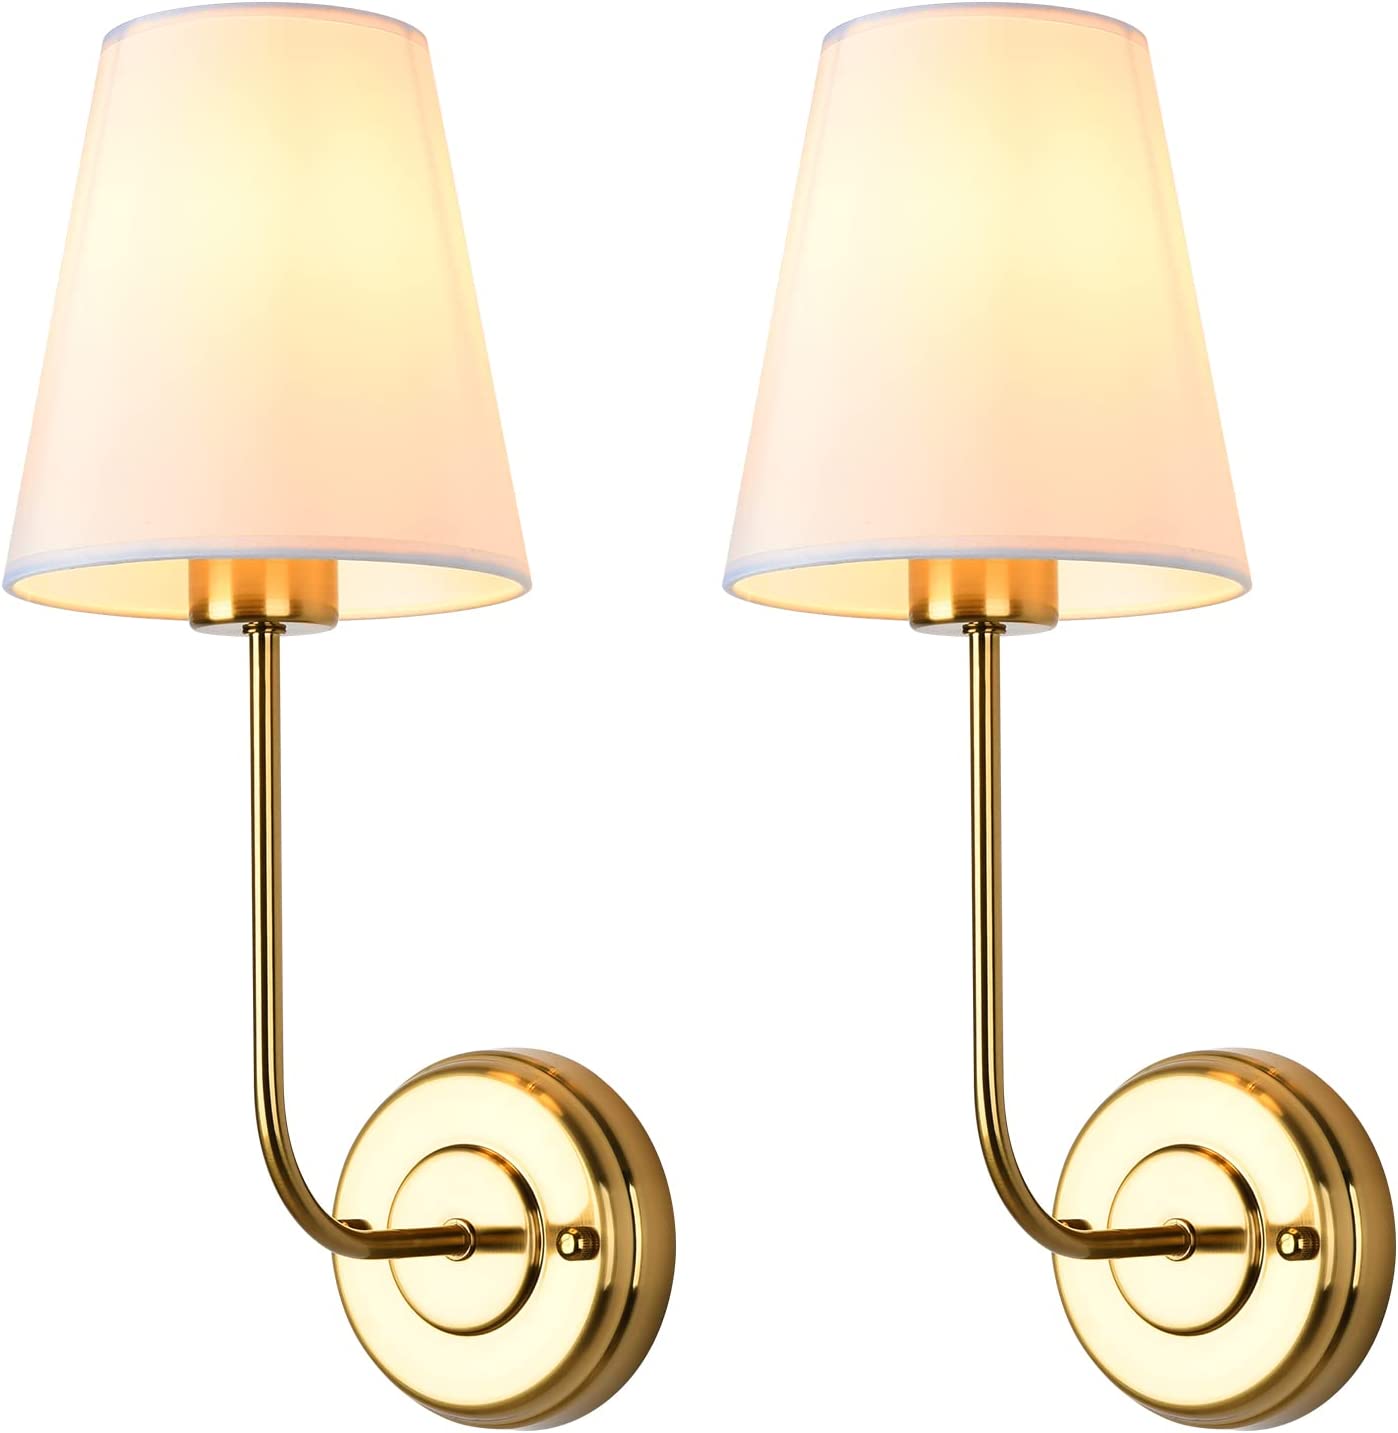 Wall Sconce Light Fixture Indoor Modern Sconces Wall Lighting Set of 2 with Flared White Fabric Shade Gold Vintage Industrial Wall Sconce Light for Bathroom Living Room Bedrooms Bedside Reading